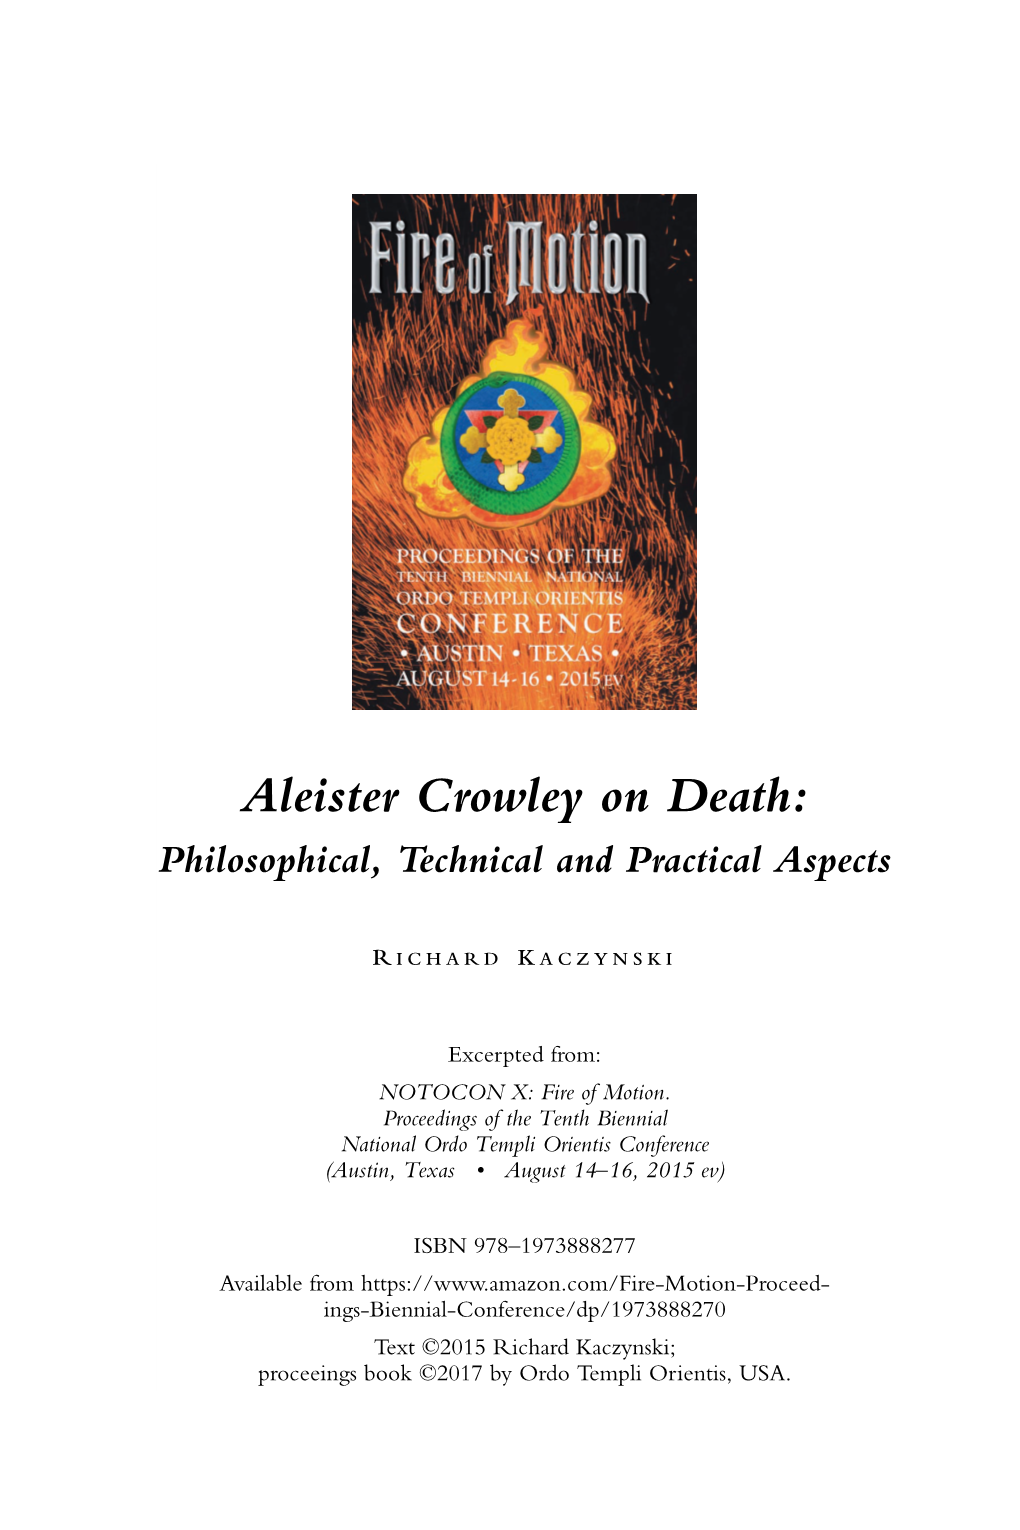 Aleister Crowley on Death: Philosophical, Technical and Practical Aspects